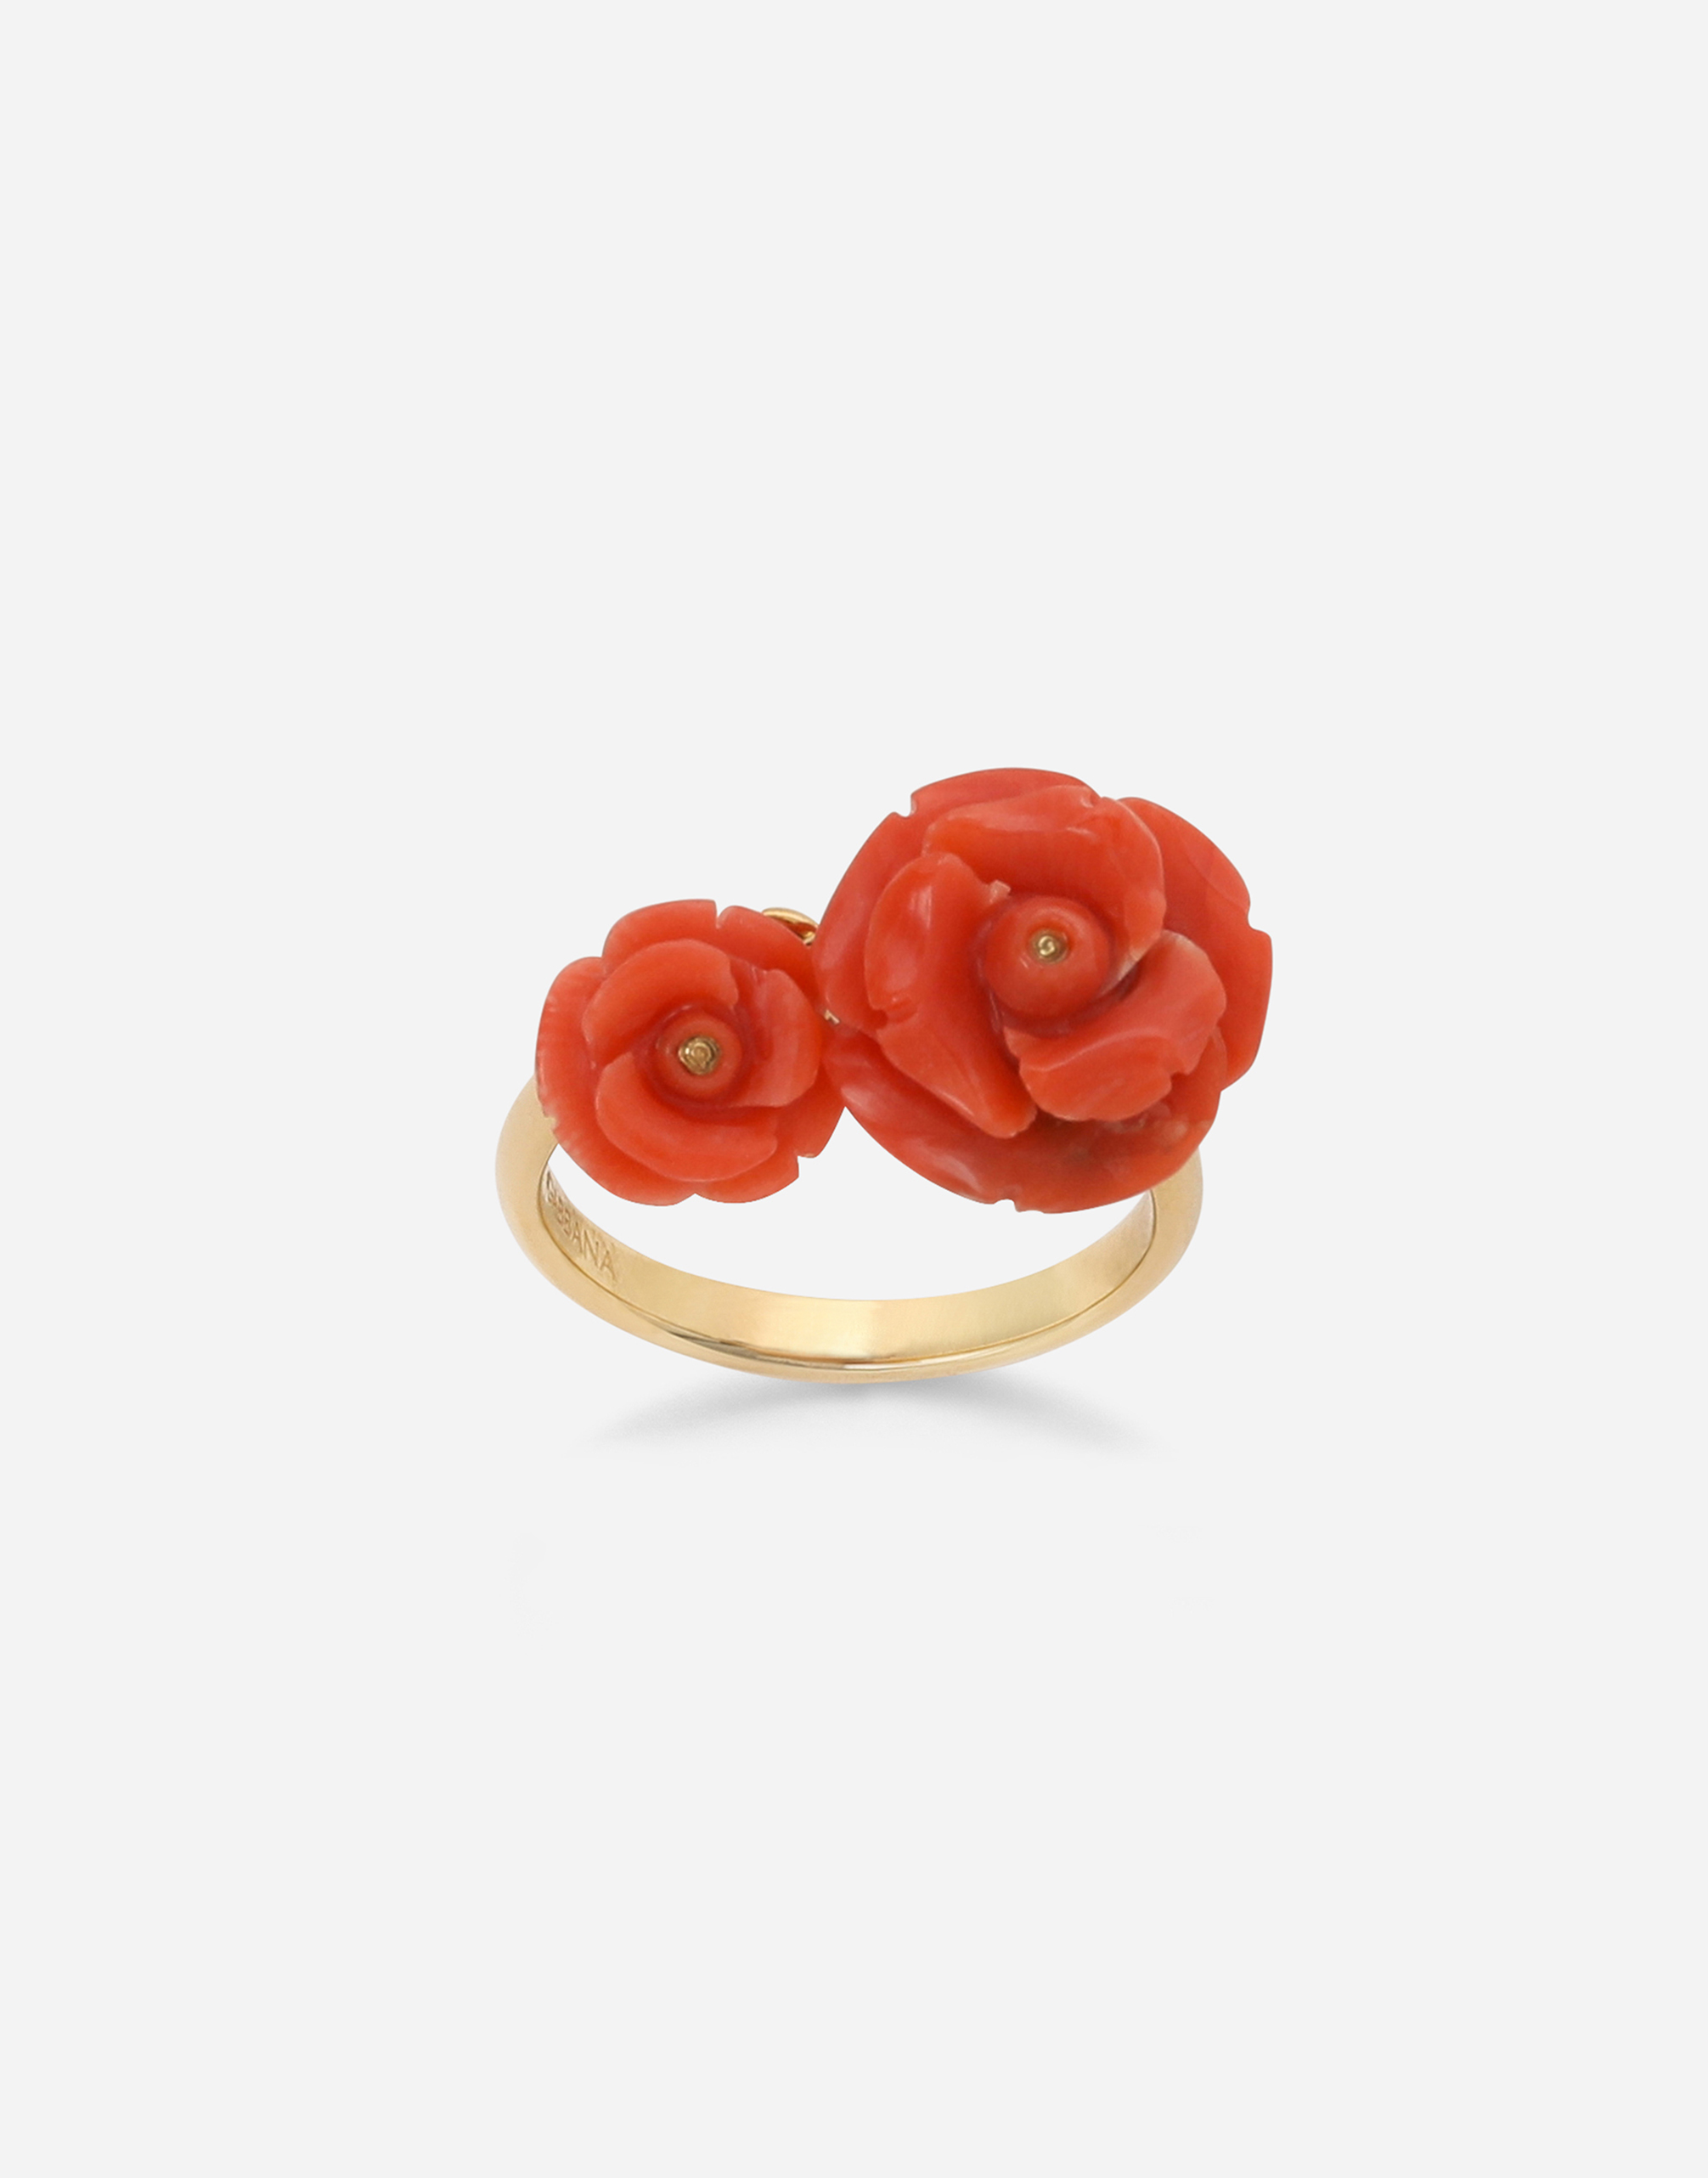 Coral ring in yellow 18kt gold with coral rose in Gold